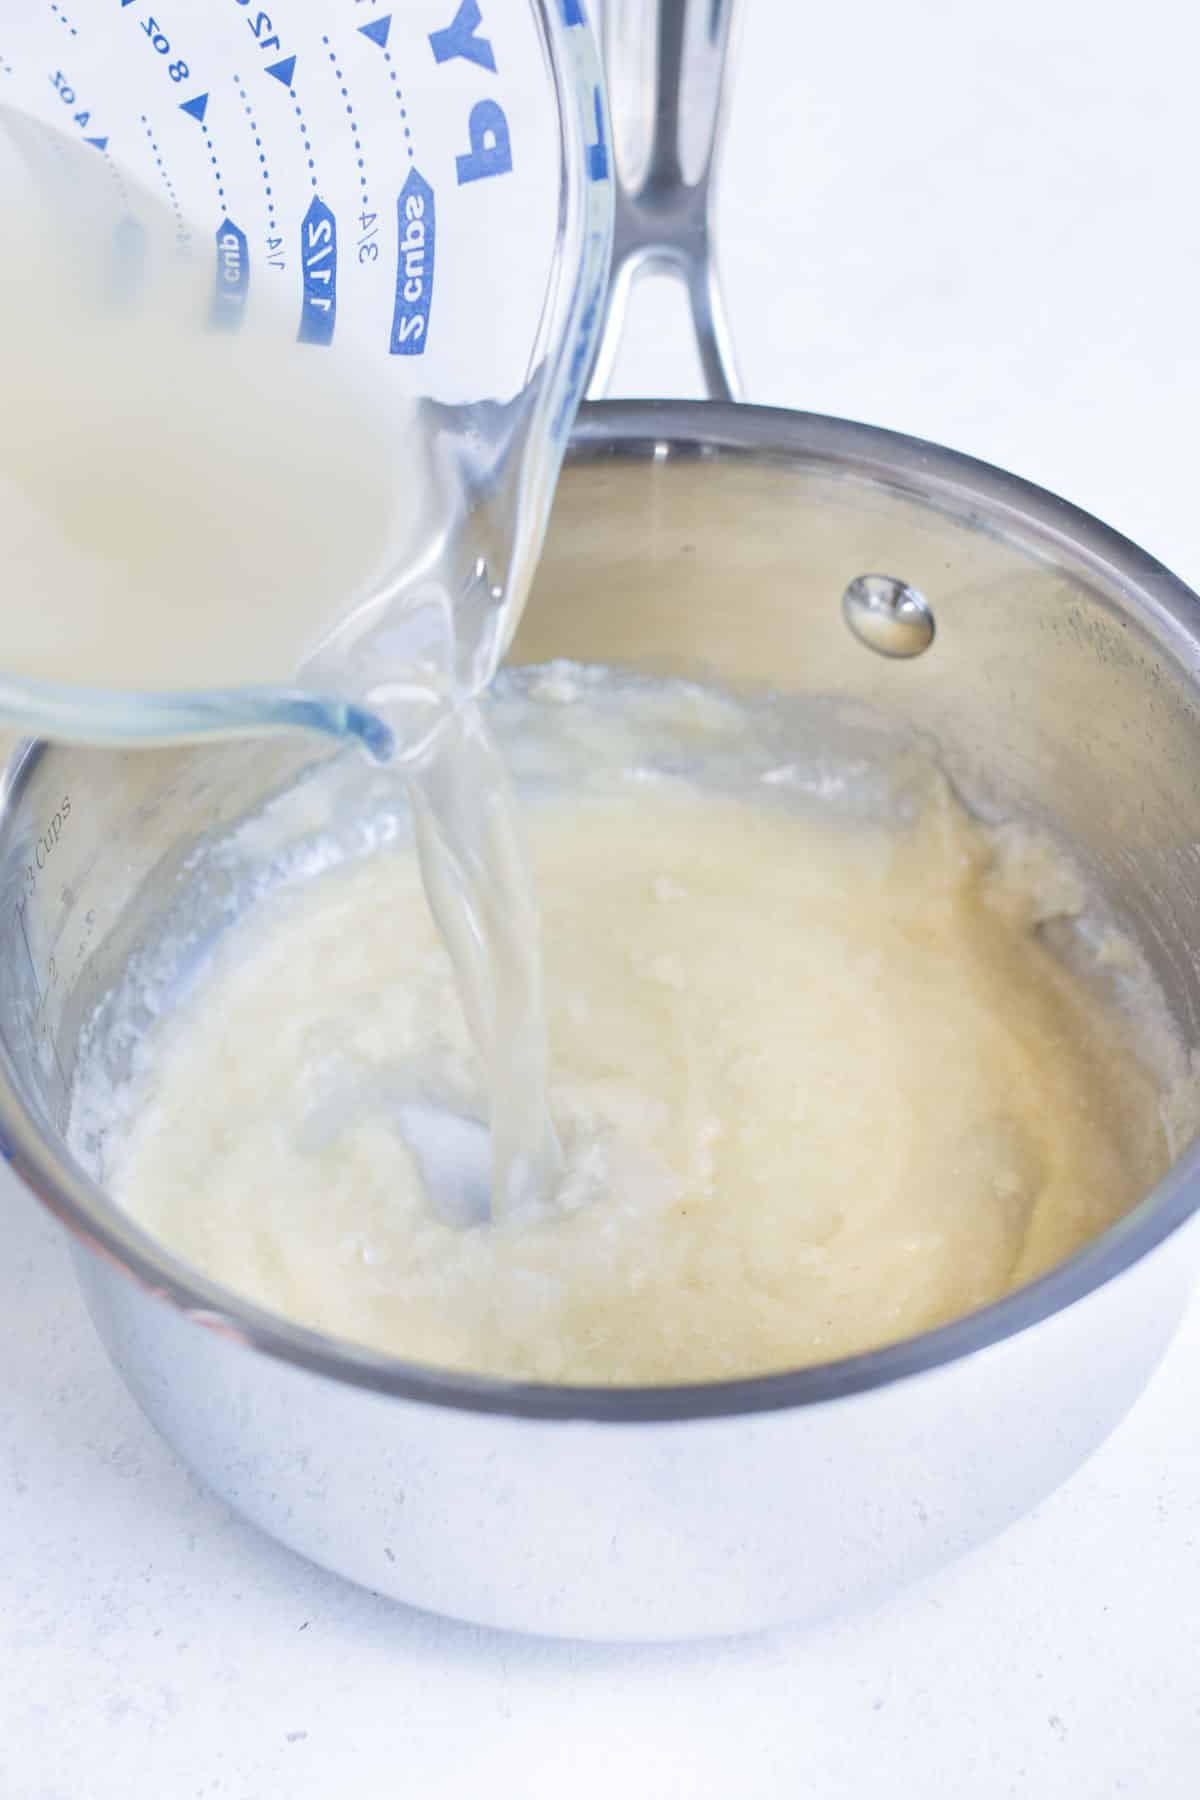 Broth is poured into a roux in batches.